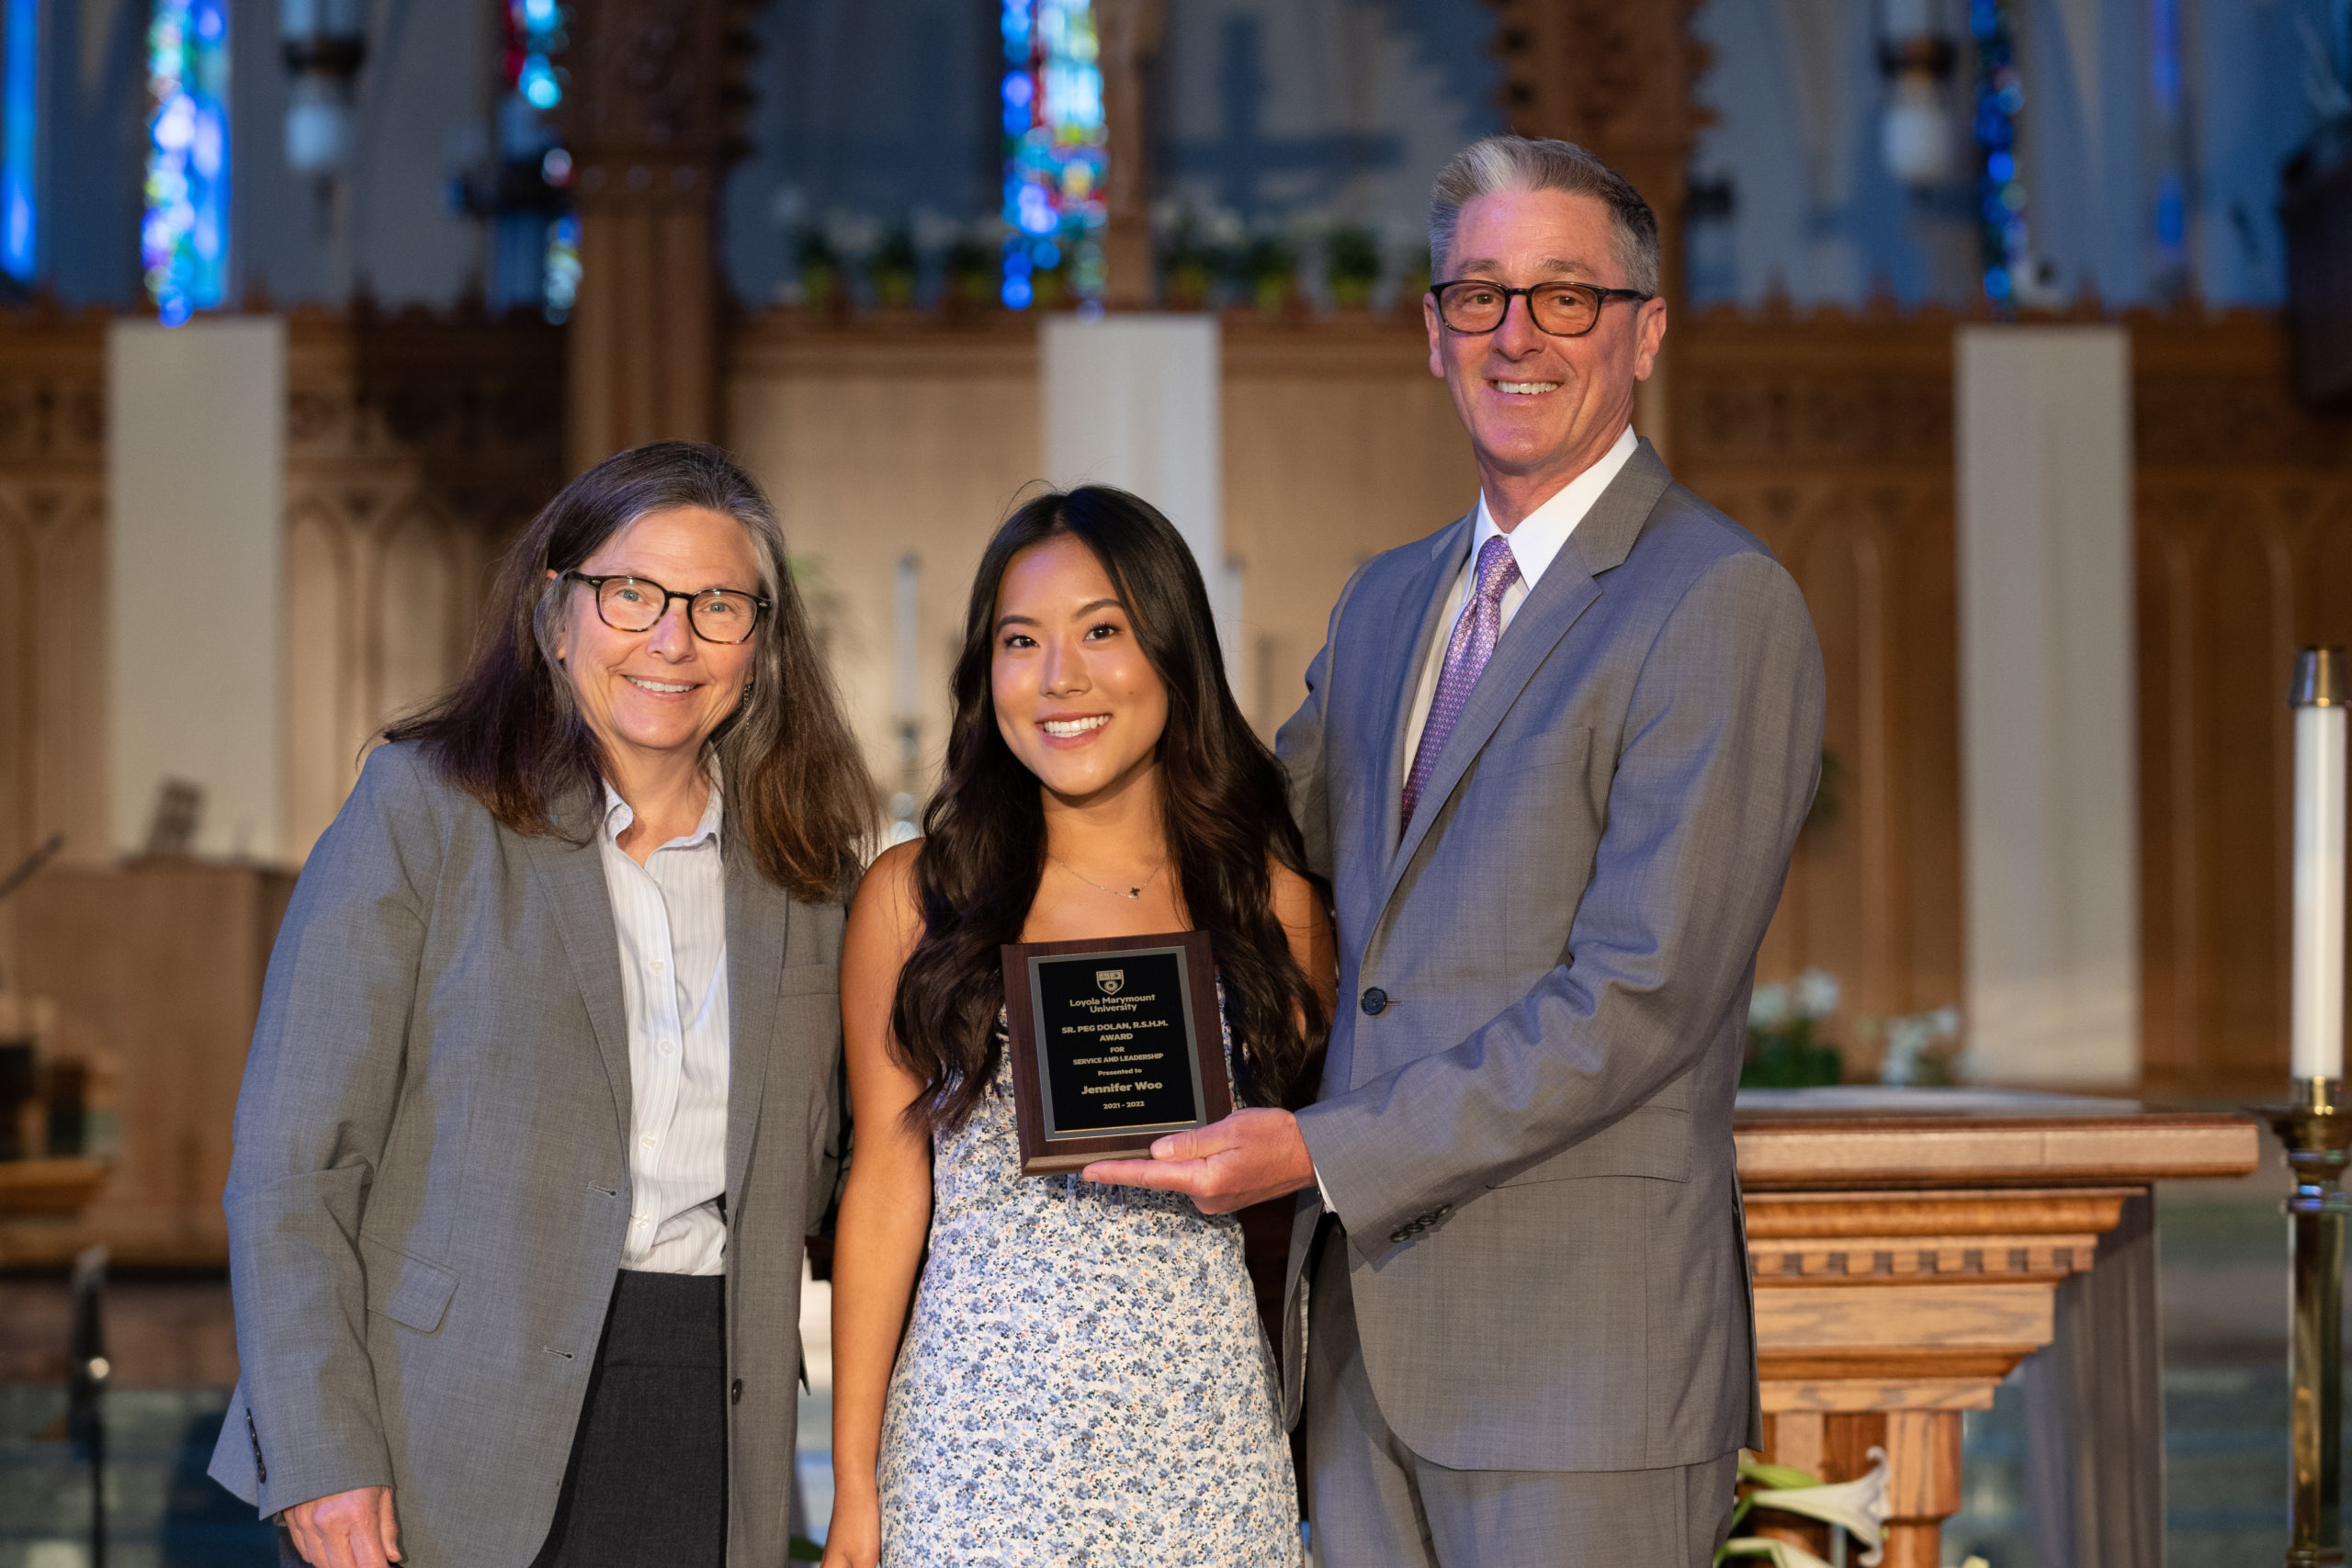 A student stands with two staff members from LMU inside the chapel to receive a Student Service and Leadership Award.